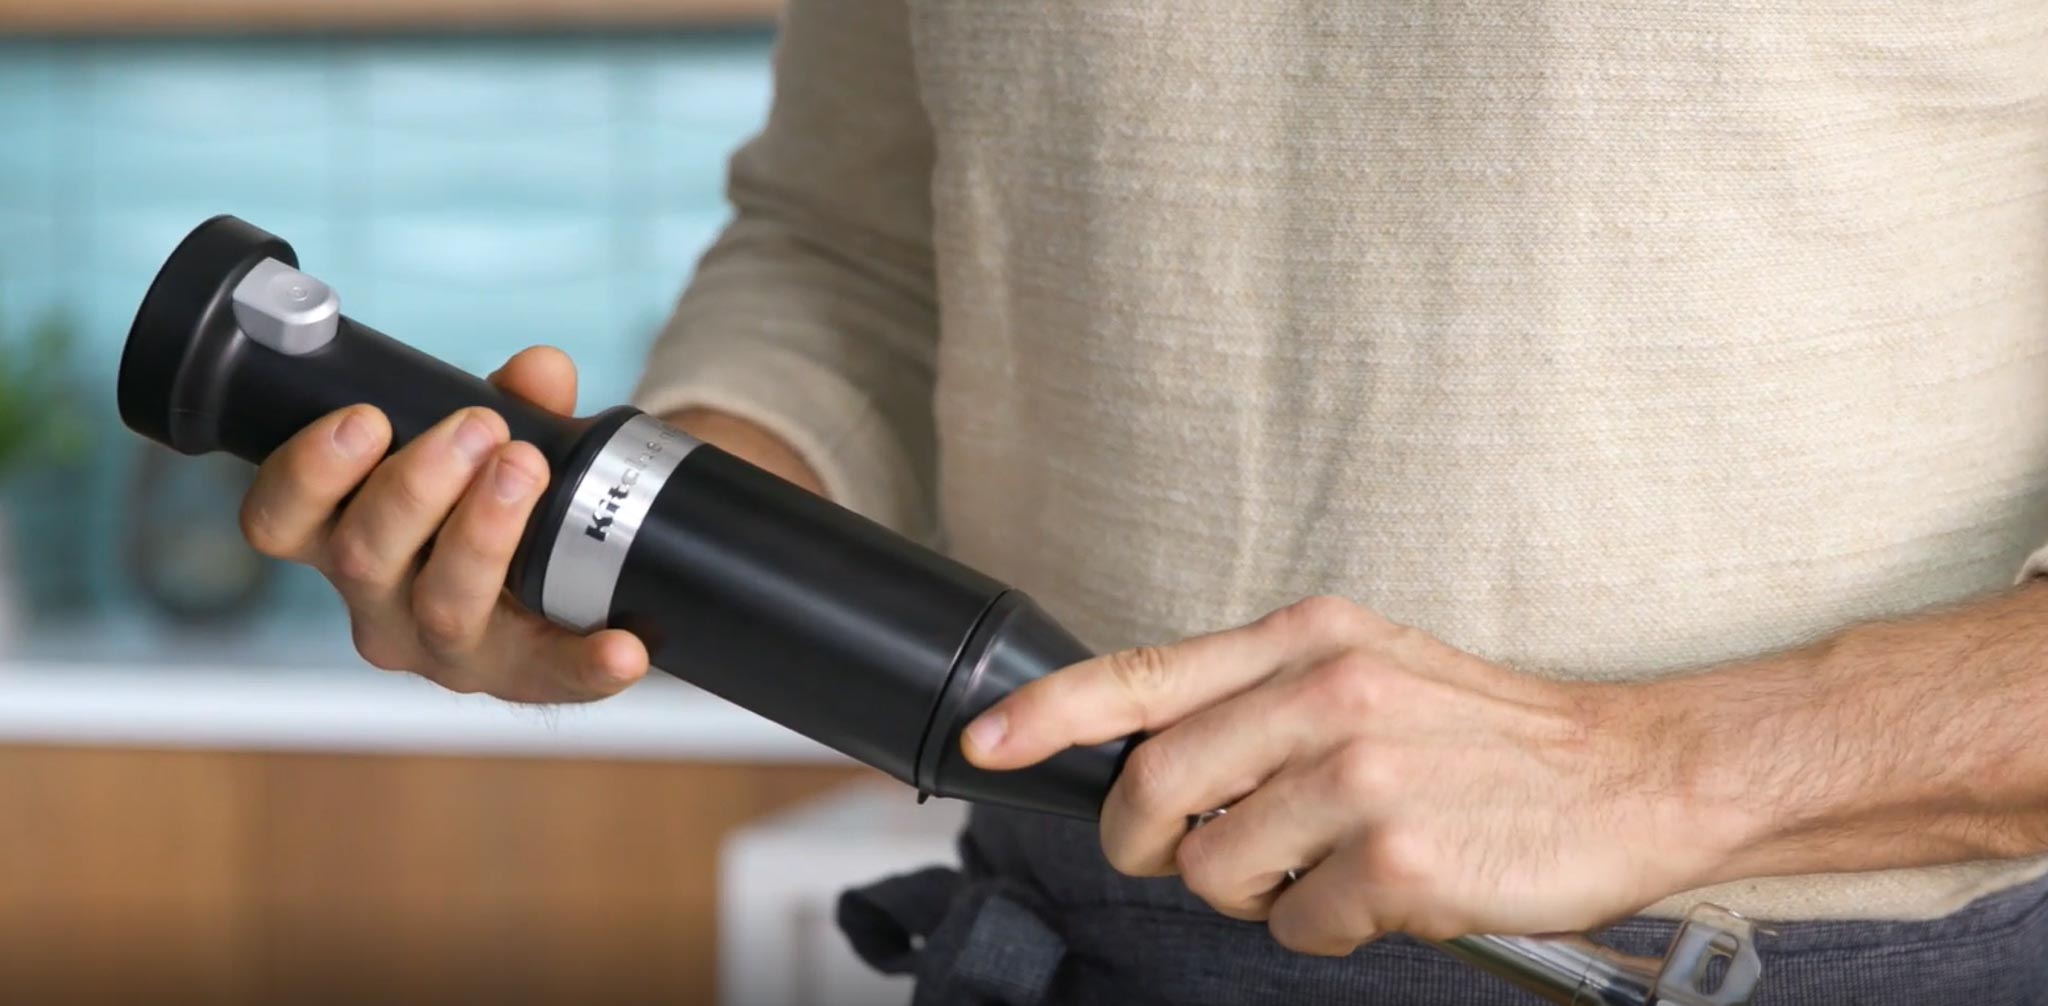 Cordless-hand-blender-with-accessories-video